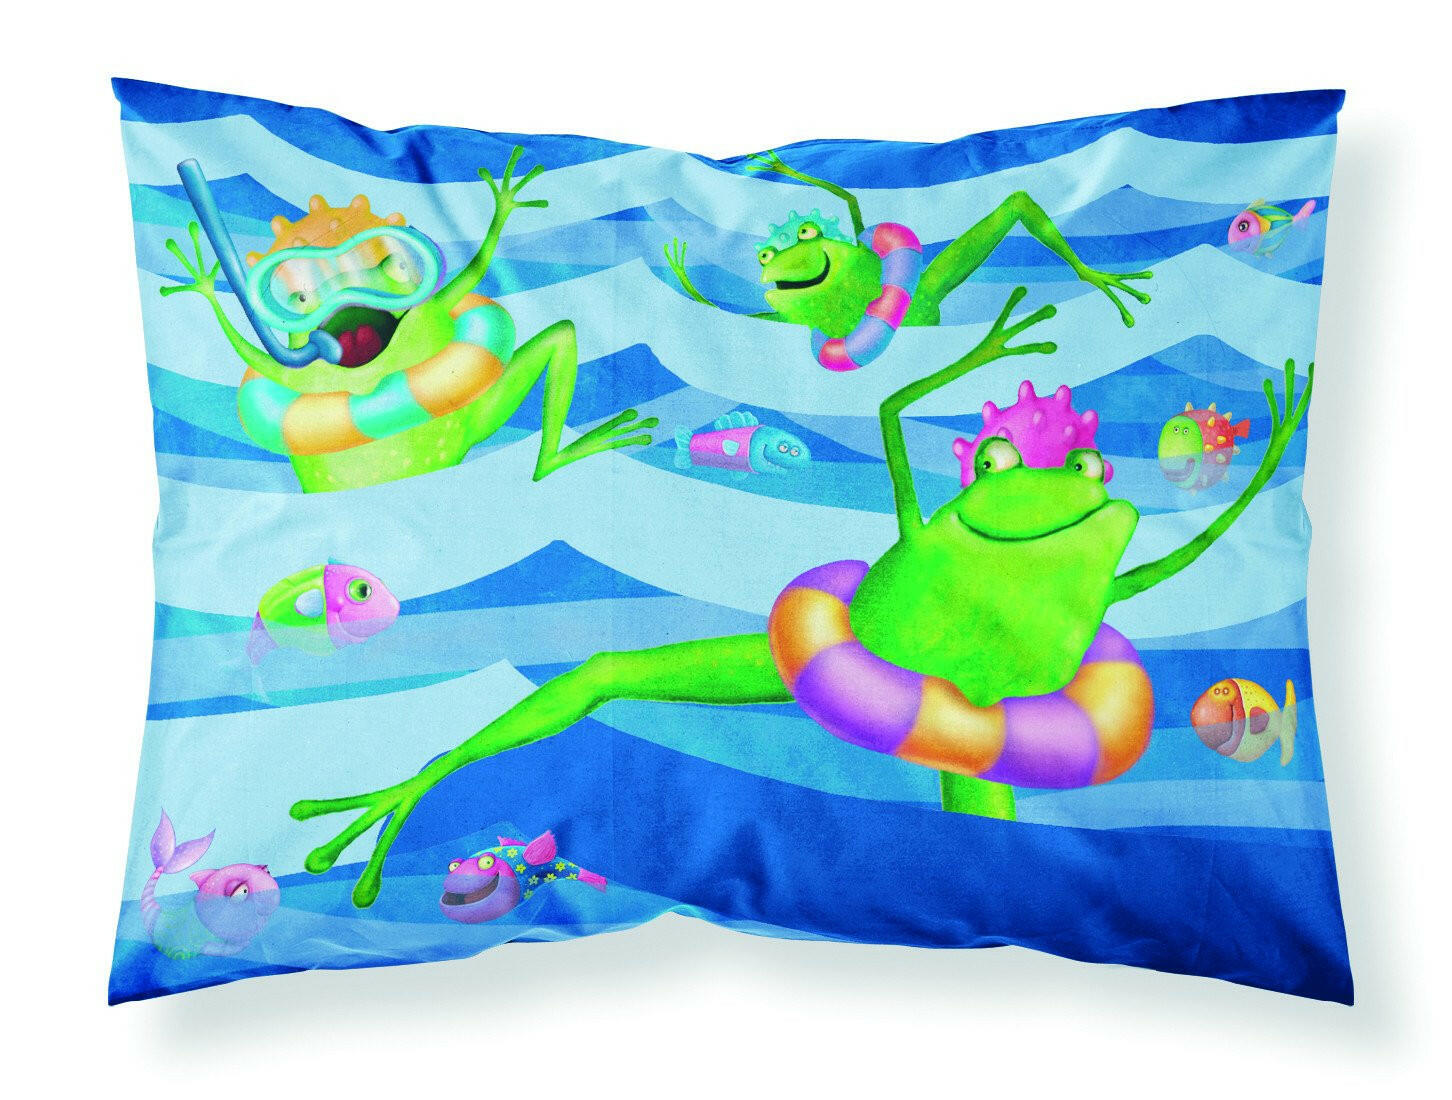 Frogs Swimming Fabric Standard Pillowcase APH0089PILLOWCASE by Caroline's Treasures